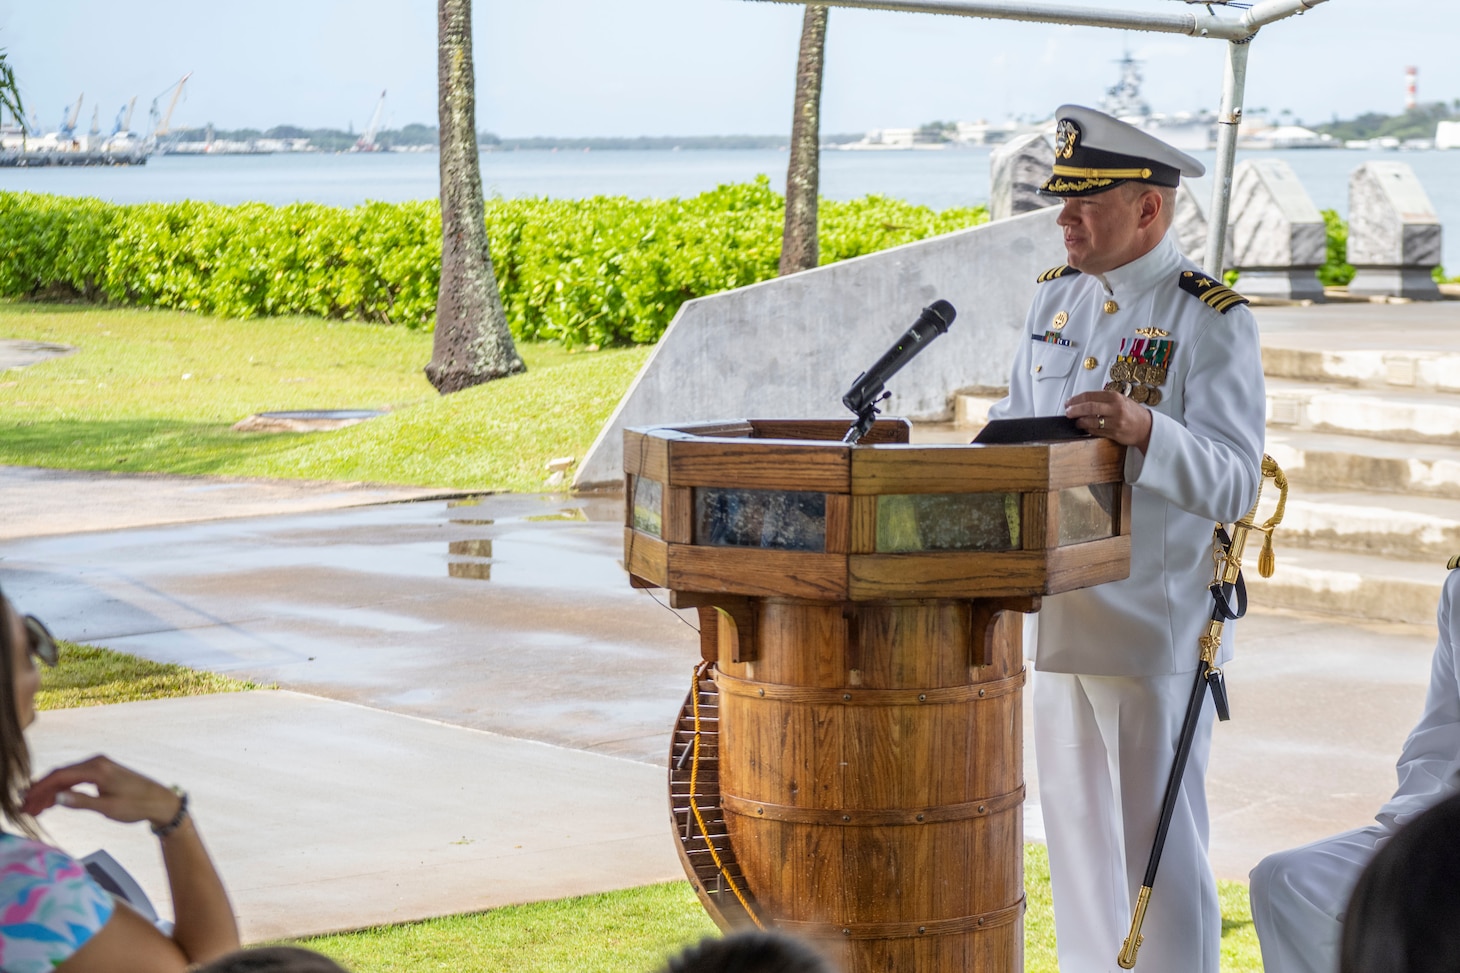 230303-N-EI510-0085 PEARL HARBOR, Hawaii (March 3, 2023) Cmdr. Robert Walls, outgoing commanding officer, Submarine Readiness Squadron 33, speaks during the change of command ceremony for Submarine Readiness Squadron 33 at the Pacific Fleet Submarine Museum, March 3, 2023.  Submarine Readiness Squadron 33 provides operational support for Pearl Harbor homeported submarines, their crews, families, and the staffs of Submarine Squadrons 1 and 7. (U.S. Navy photo by Mass Communication Specialist 1st Class Scott Barnes)